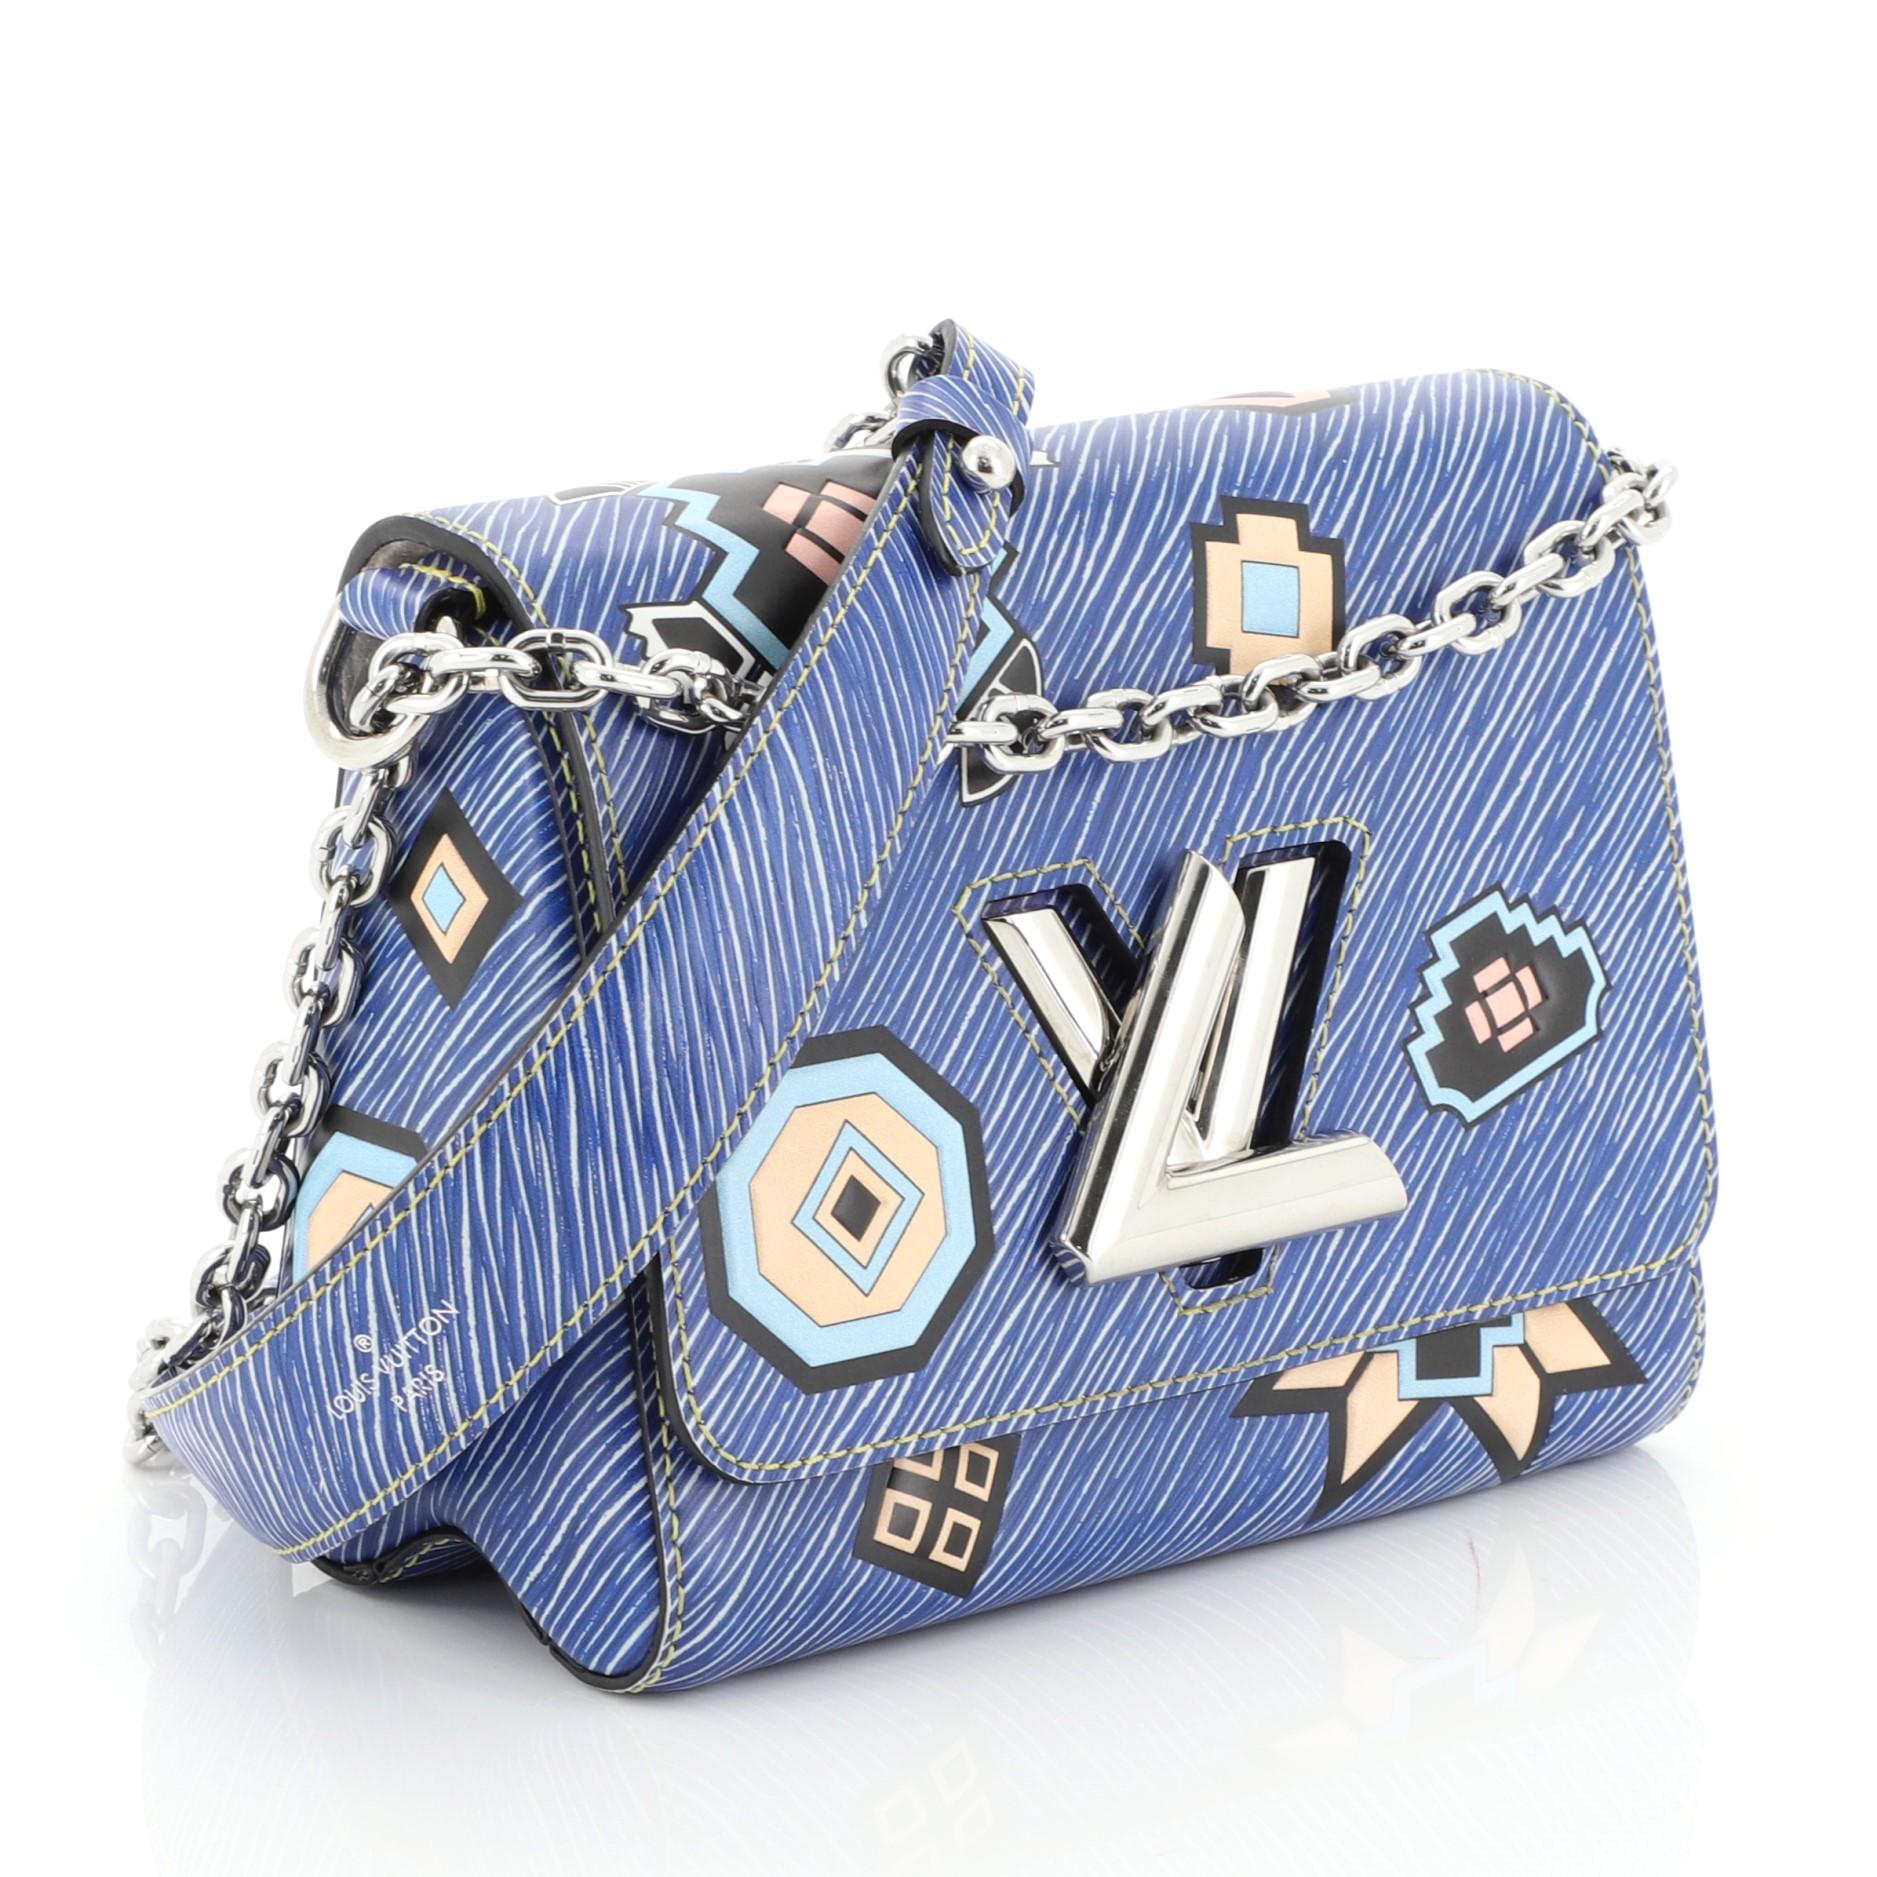 
This Louis Vuitton Twist Handbag Limited Edition Azteque Epi Leather MM, crafted from blue azteque epi leather, features long chain strap with leather pad and silver-tone hardware. Its flap with twist-lock closure opens to a neutral microfiber